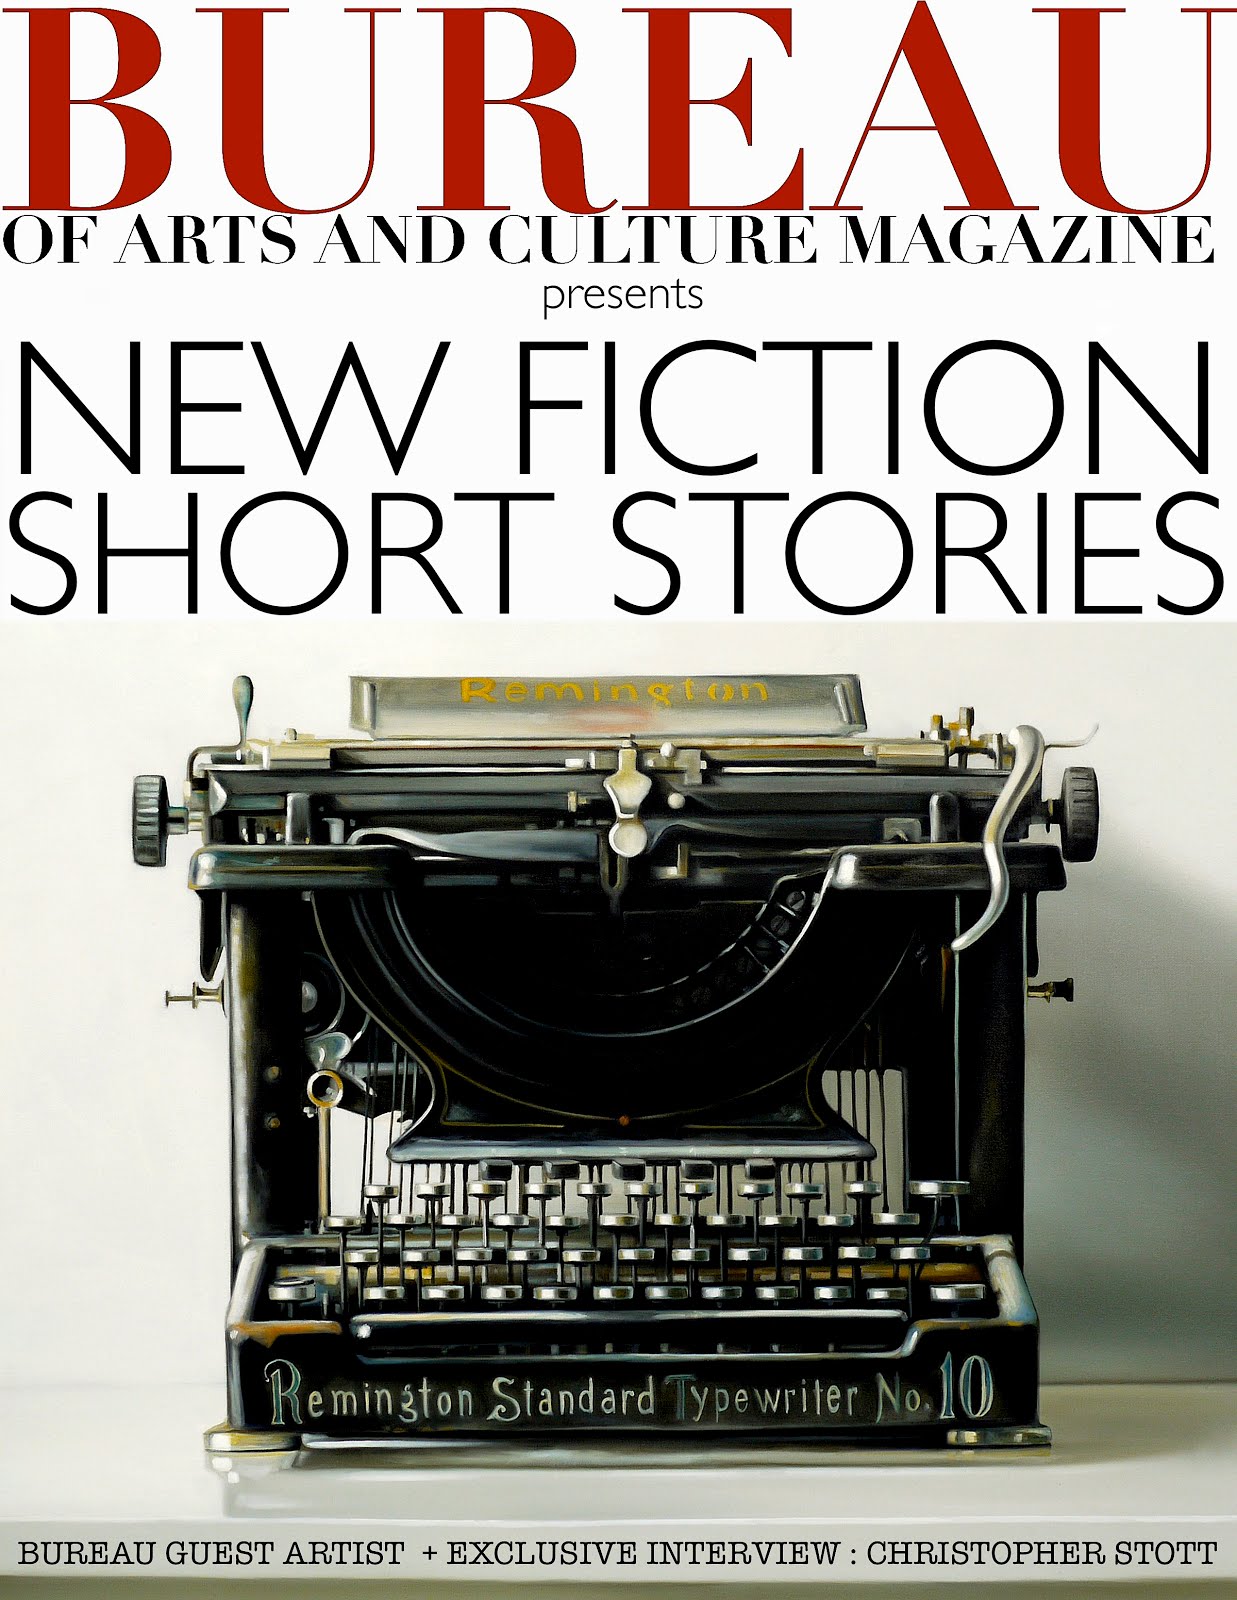 The NEW SHORT STORY SERIES